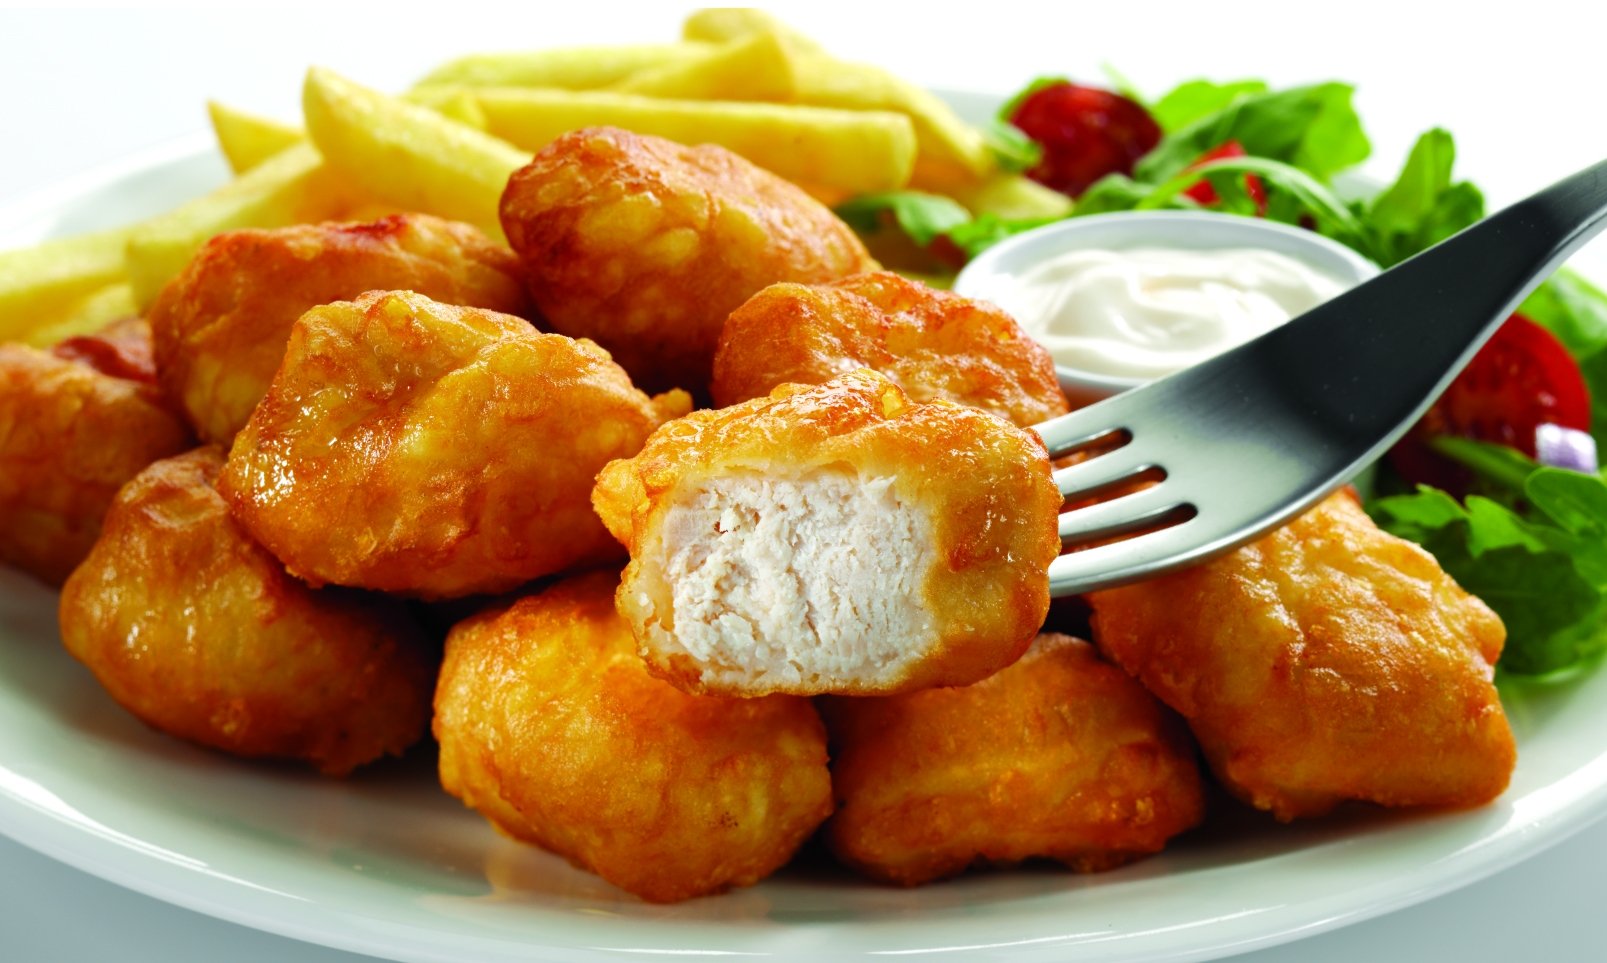 You Can Now Get Paid To Eat Chicken Nuggets, Fish Fingers And Other ...